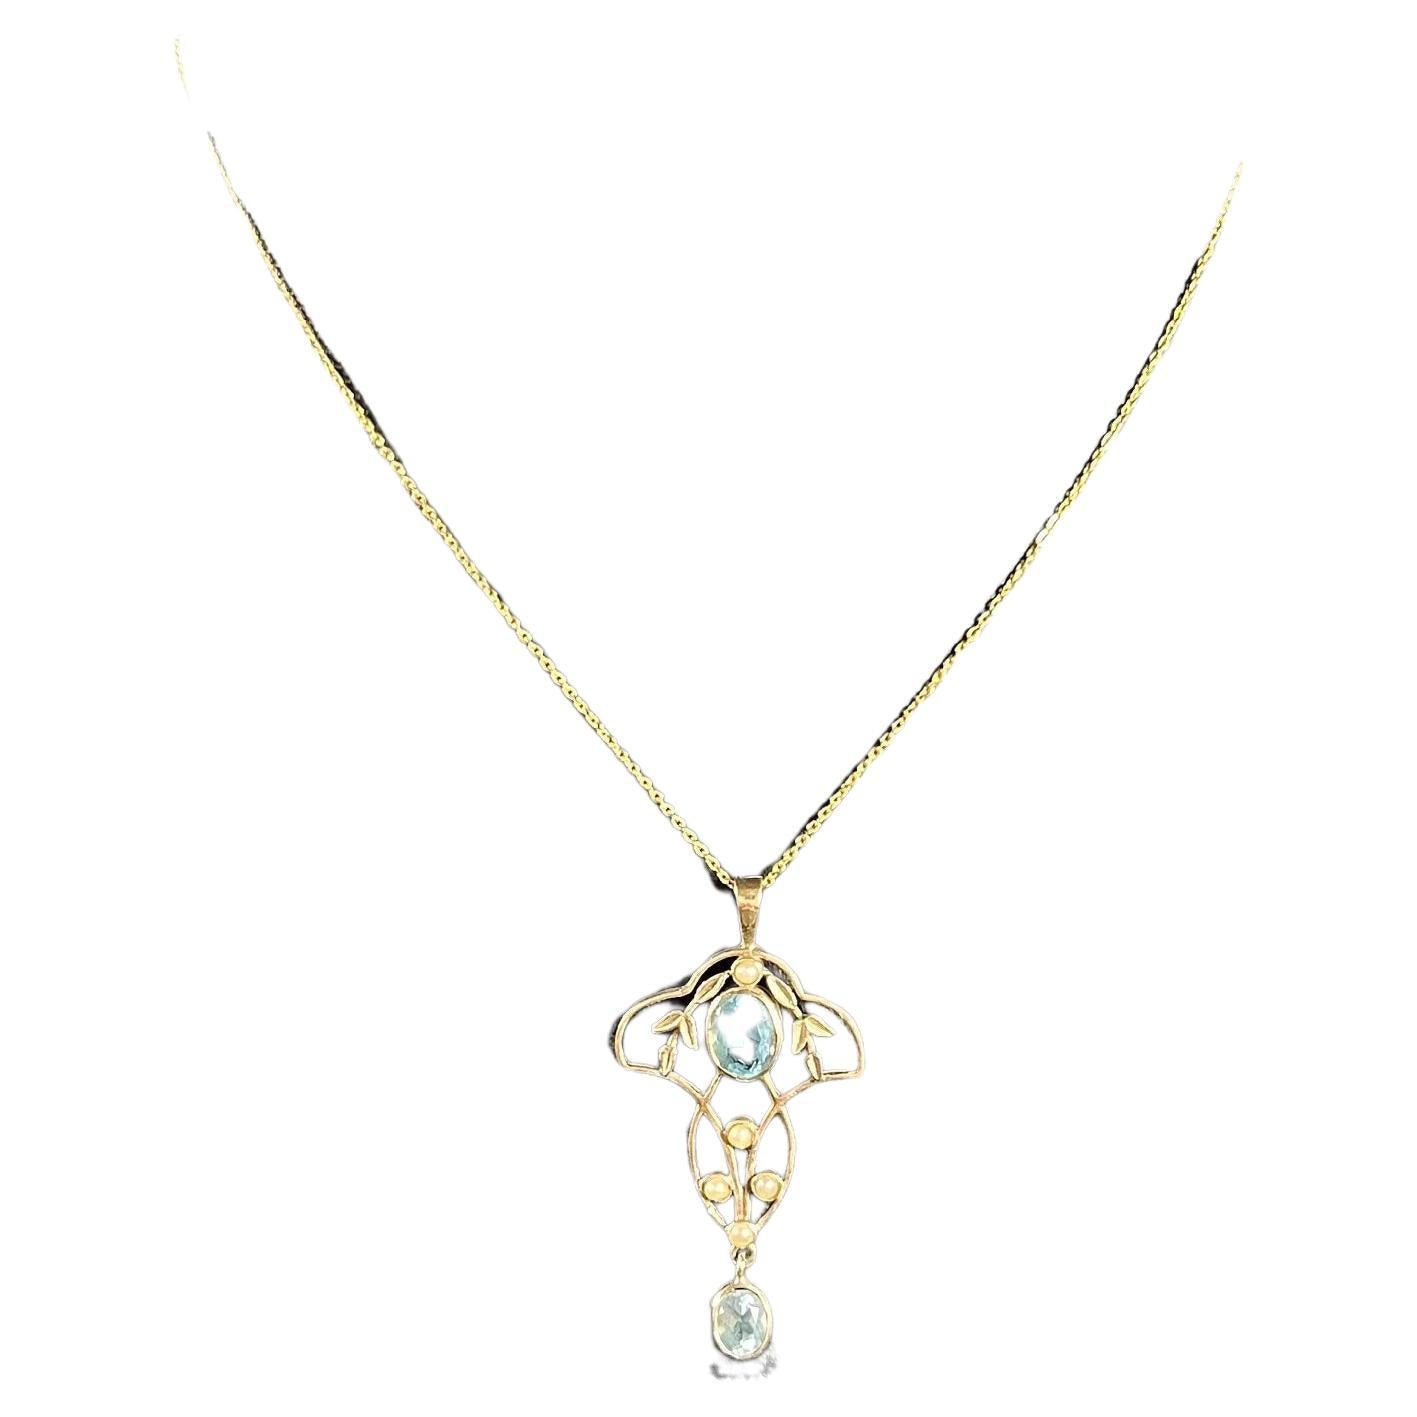 Antique 9ct Gold Edwardian Aquamarine & Pearl Pendant

9ct Gold Stamped

Circa 1910

This stunning pendant is a true embodiment of the elegant and timeless Edwardian era. Crafted from 9ct gold, it features two, captivating, oval aquamarine stones